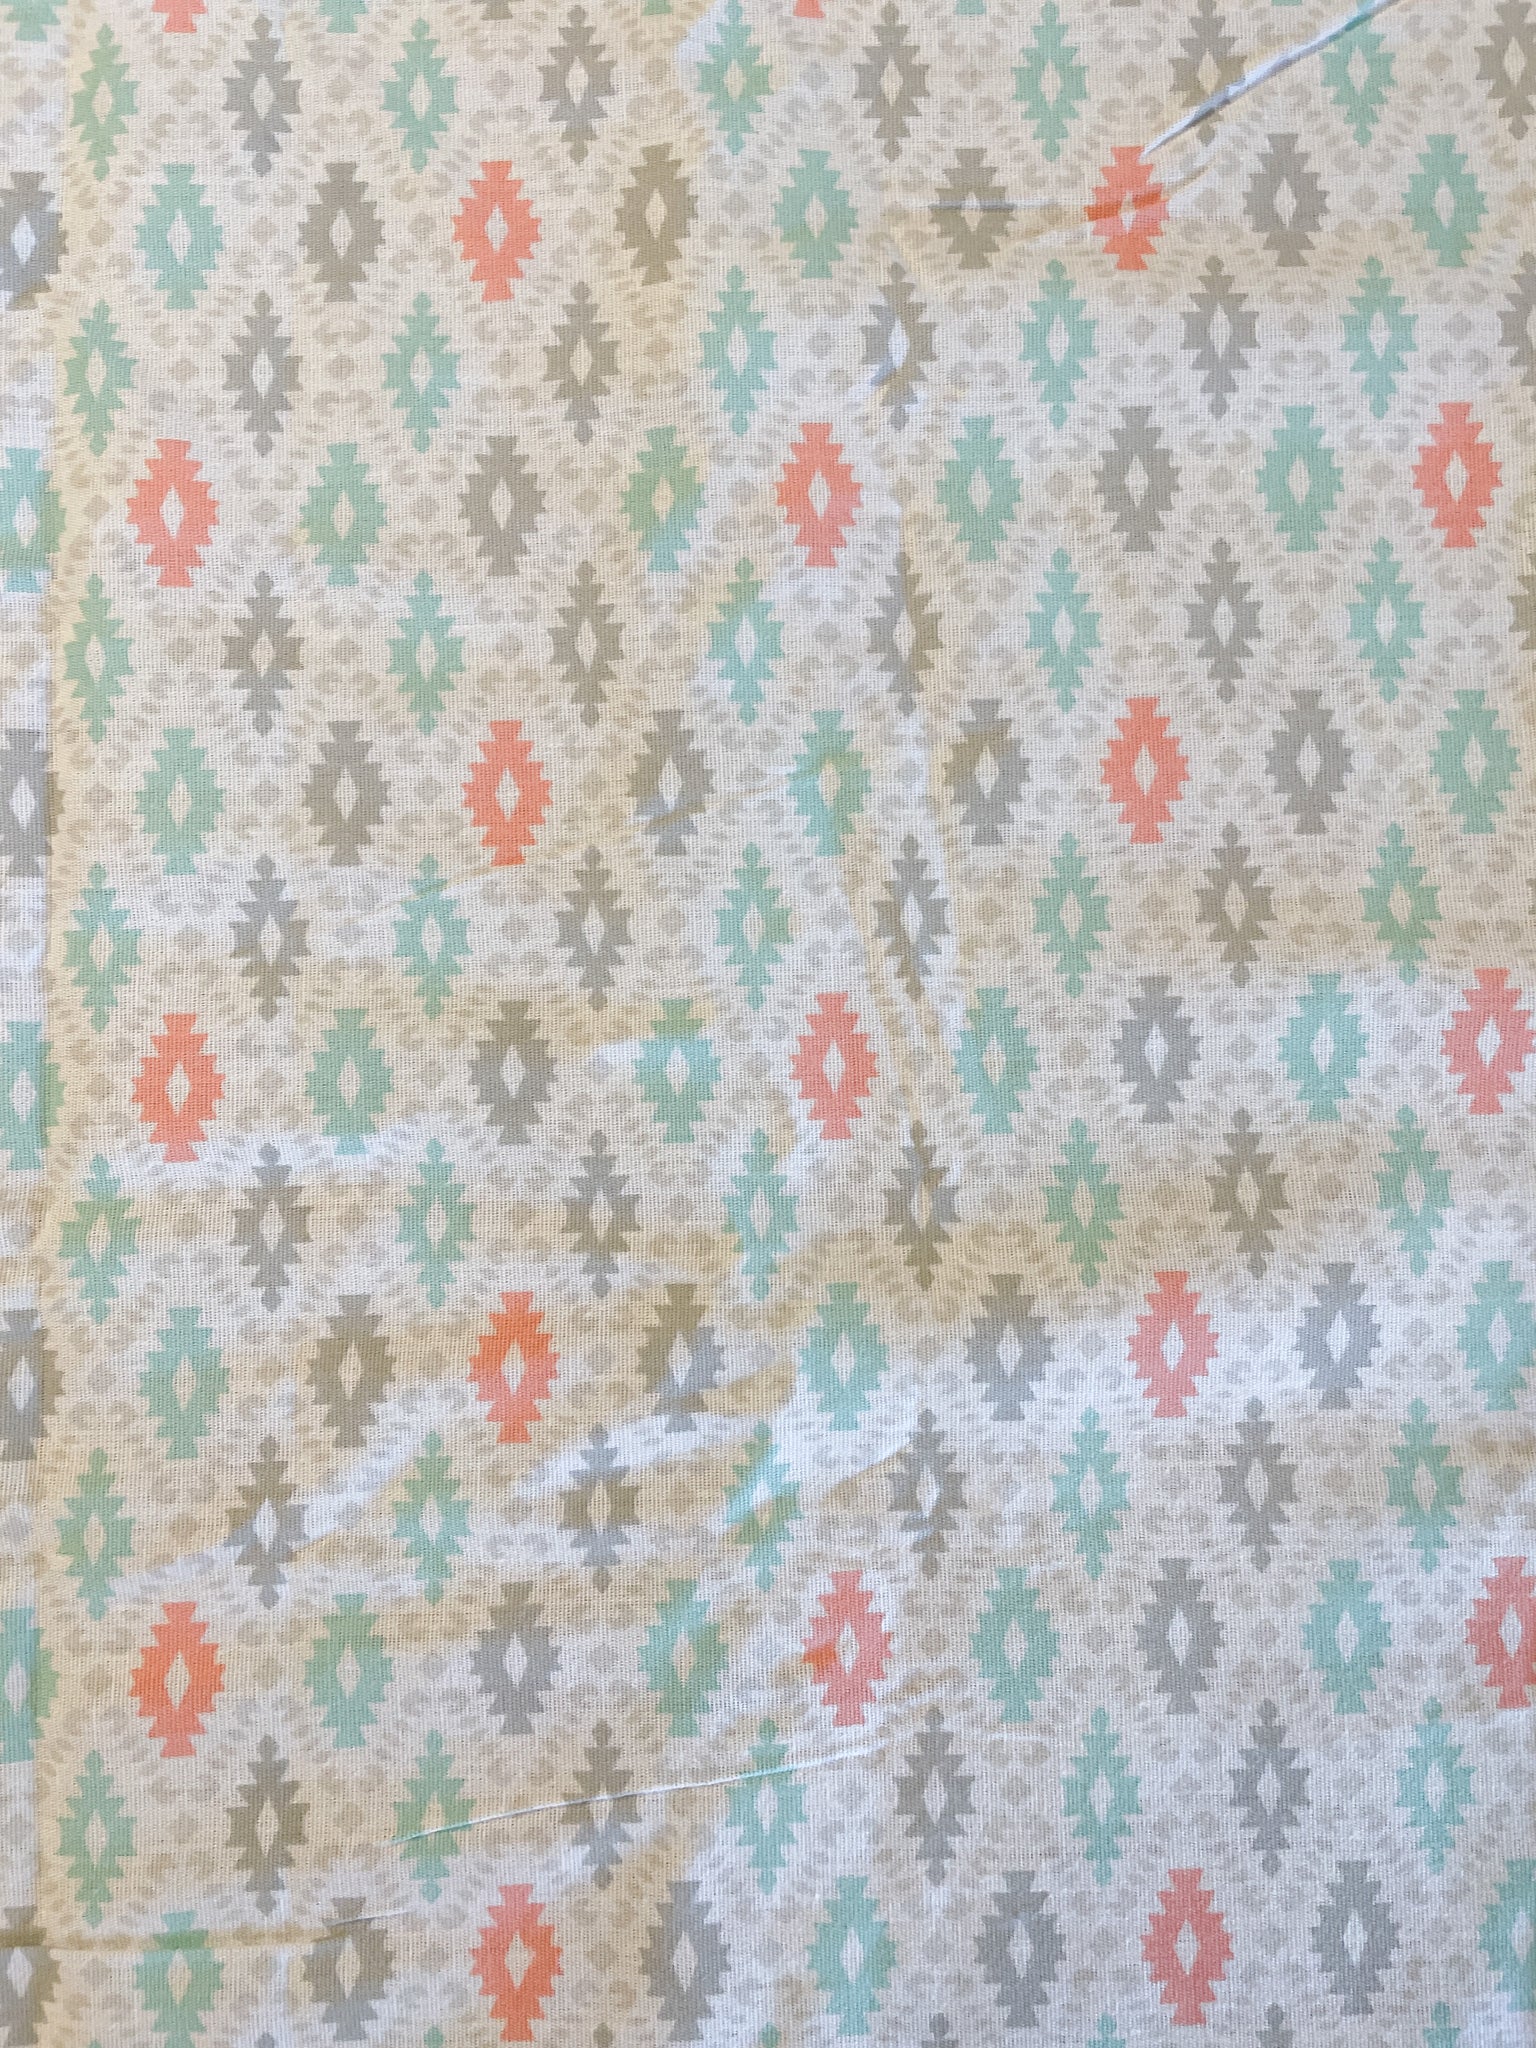 SALE 2 2/3 YD Poly Cotton Unused Bed Sheet - White with Gray, Aqua and Peach Southwestern Motifs